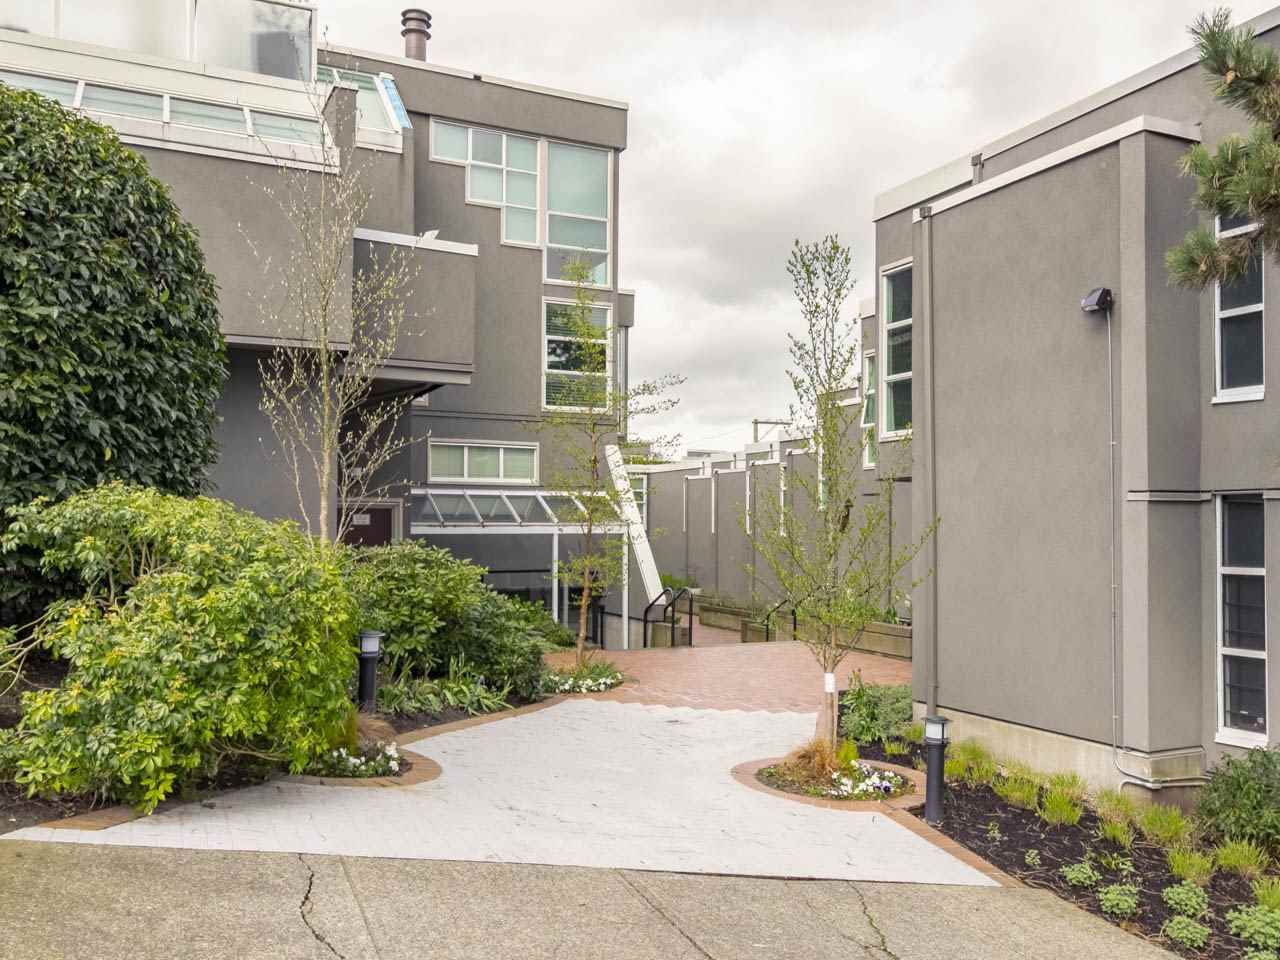 Main Photo: 2225 OAK STREET in Vancouver: Fairview VW Townhouse for sale (Vancouver West)  : MLS®# R2256222